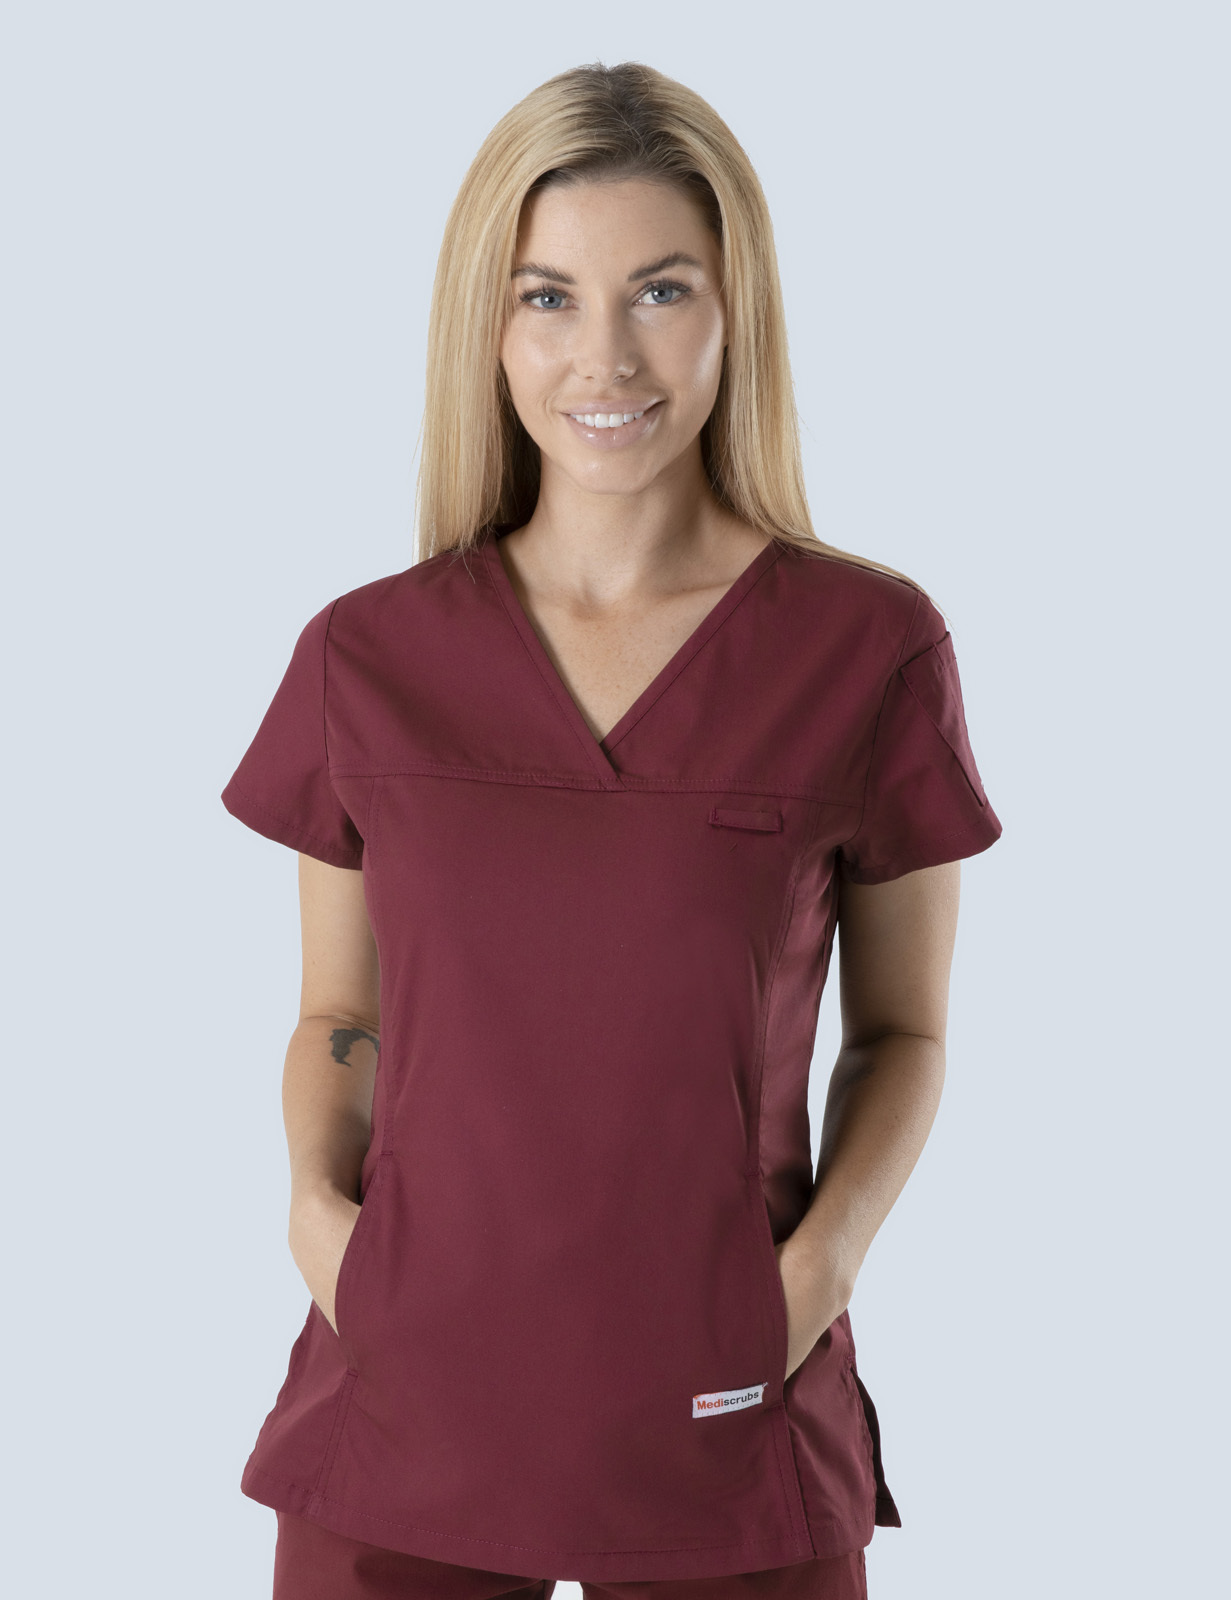 Fremantle Hospital - Occupational Therapy (Women's Fit Solid Scrub Top in Burgundy incl Logos)